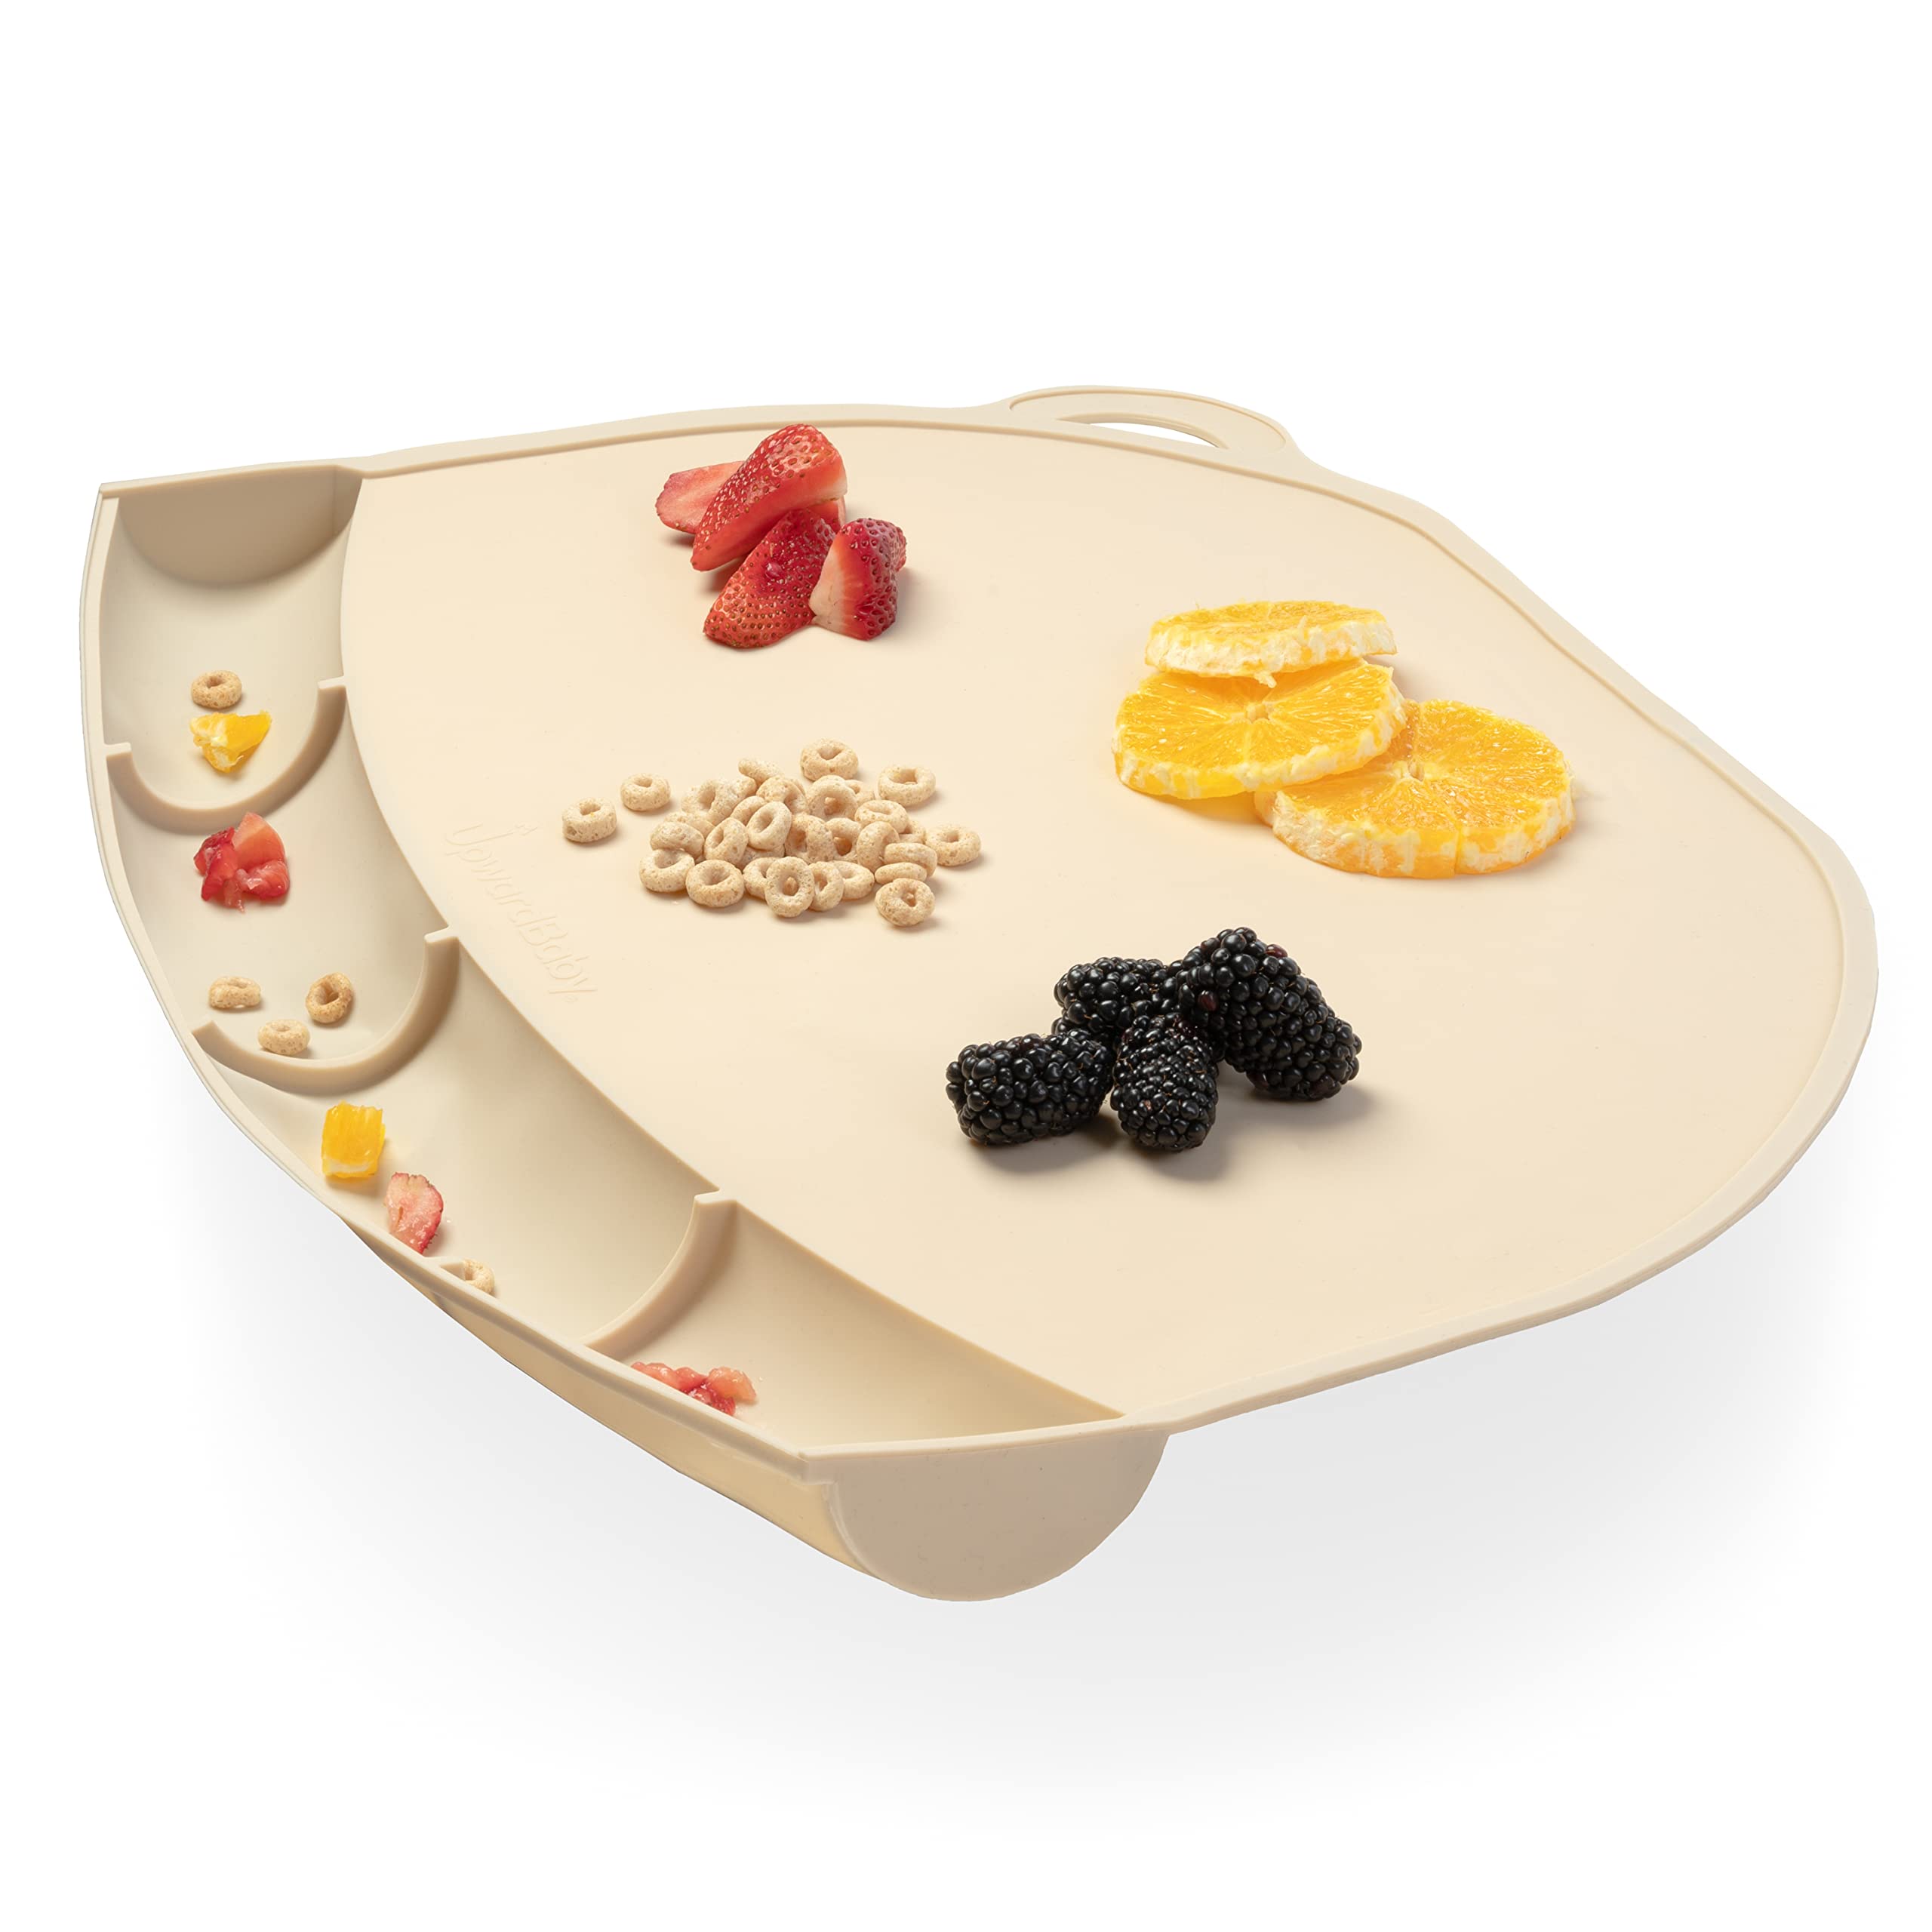 UpwardBaby Original Food Catching Placemats For Round Table Only